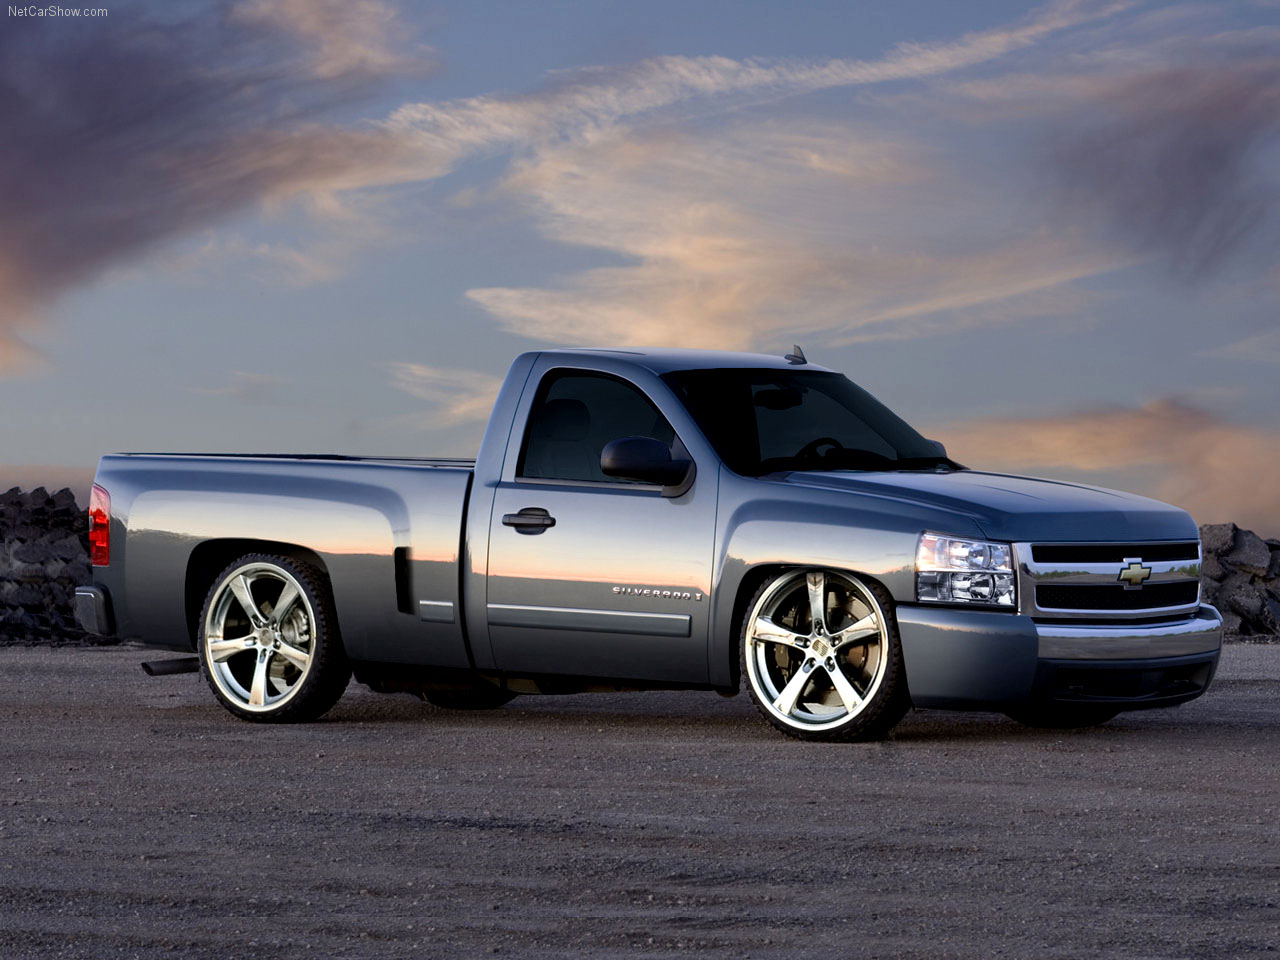 Chevy Truck Wallpapers 6625 Hd Wallpapers in Cars   Imagescicom 1280x960